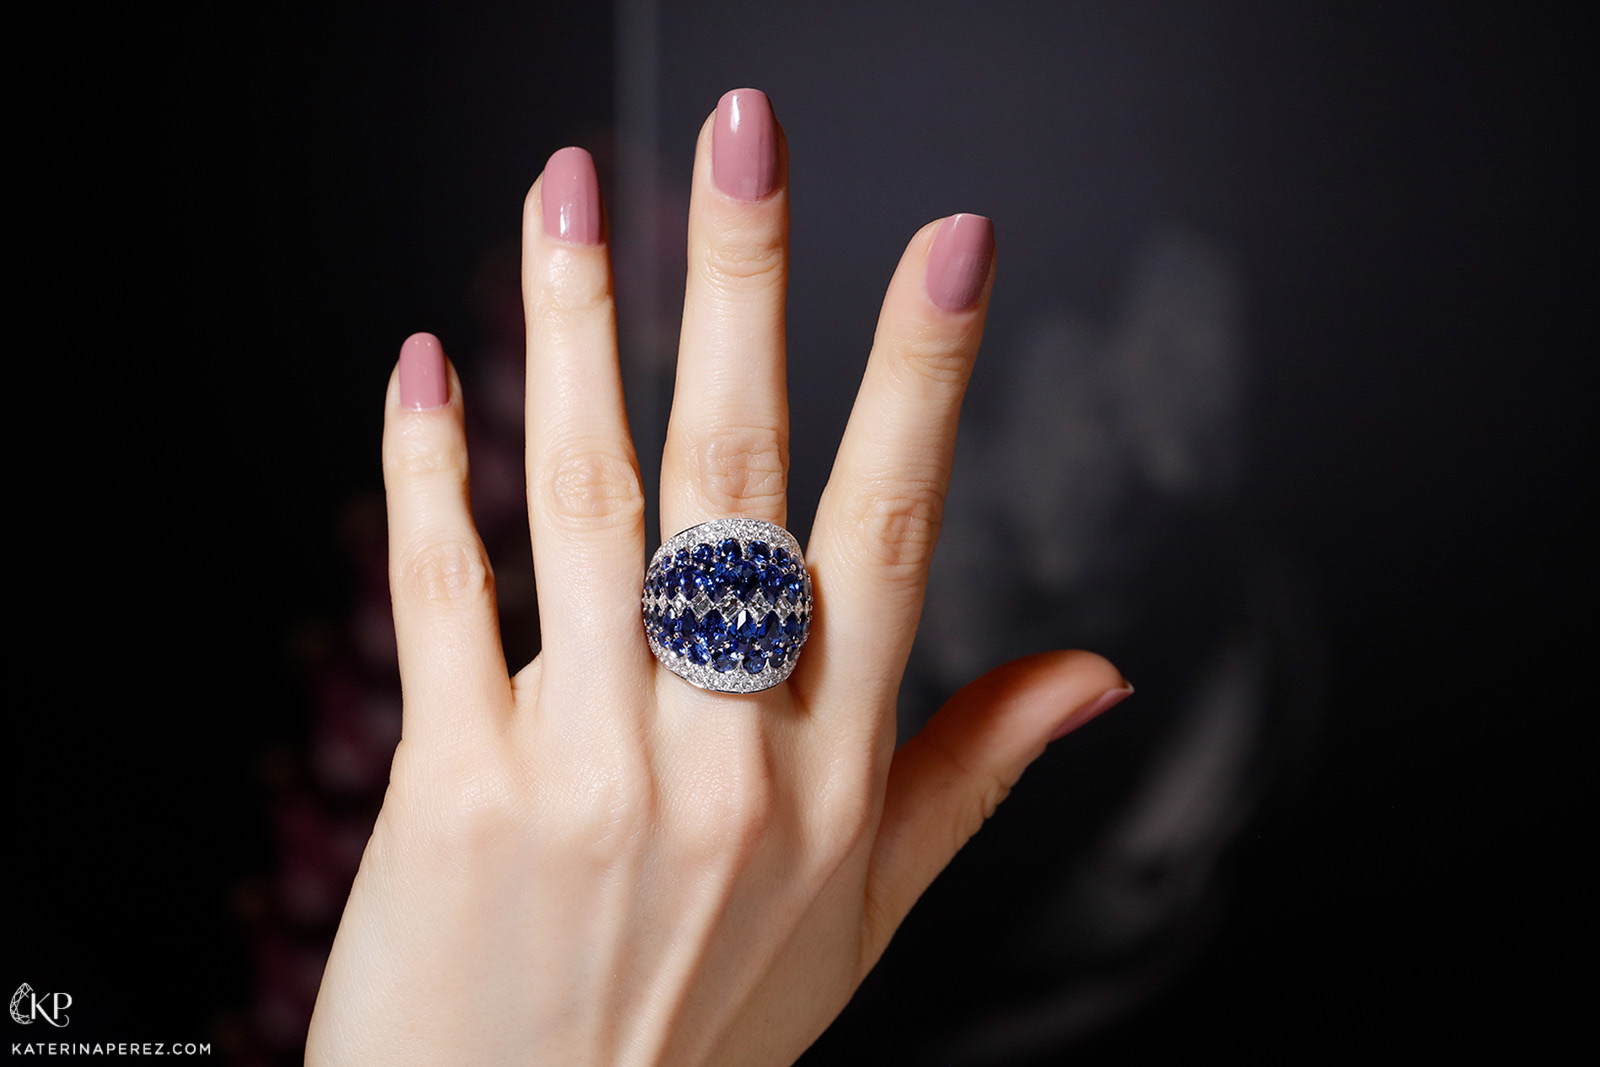 Baenteli Sphere ring with blue sapphires and diamonds